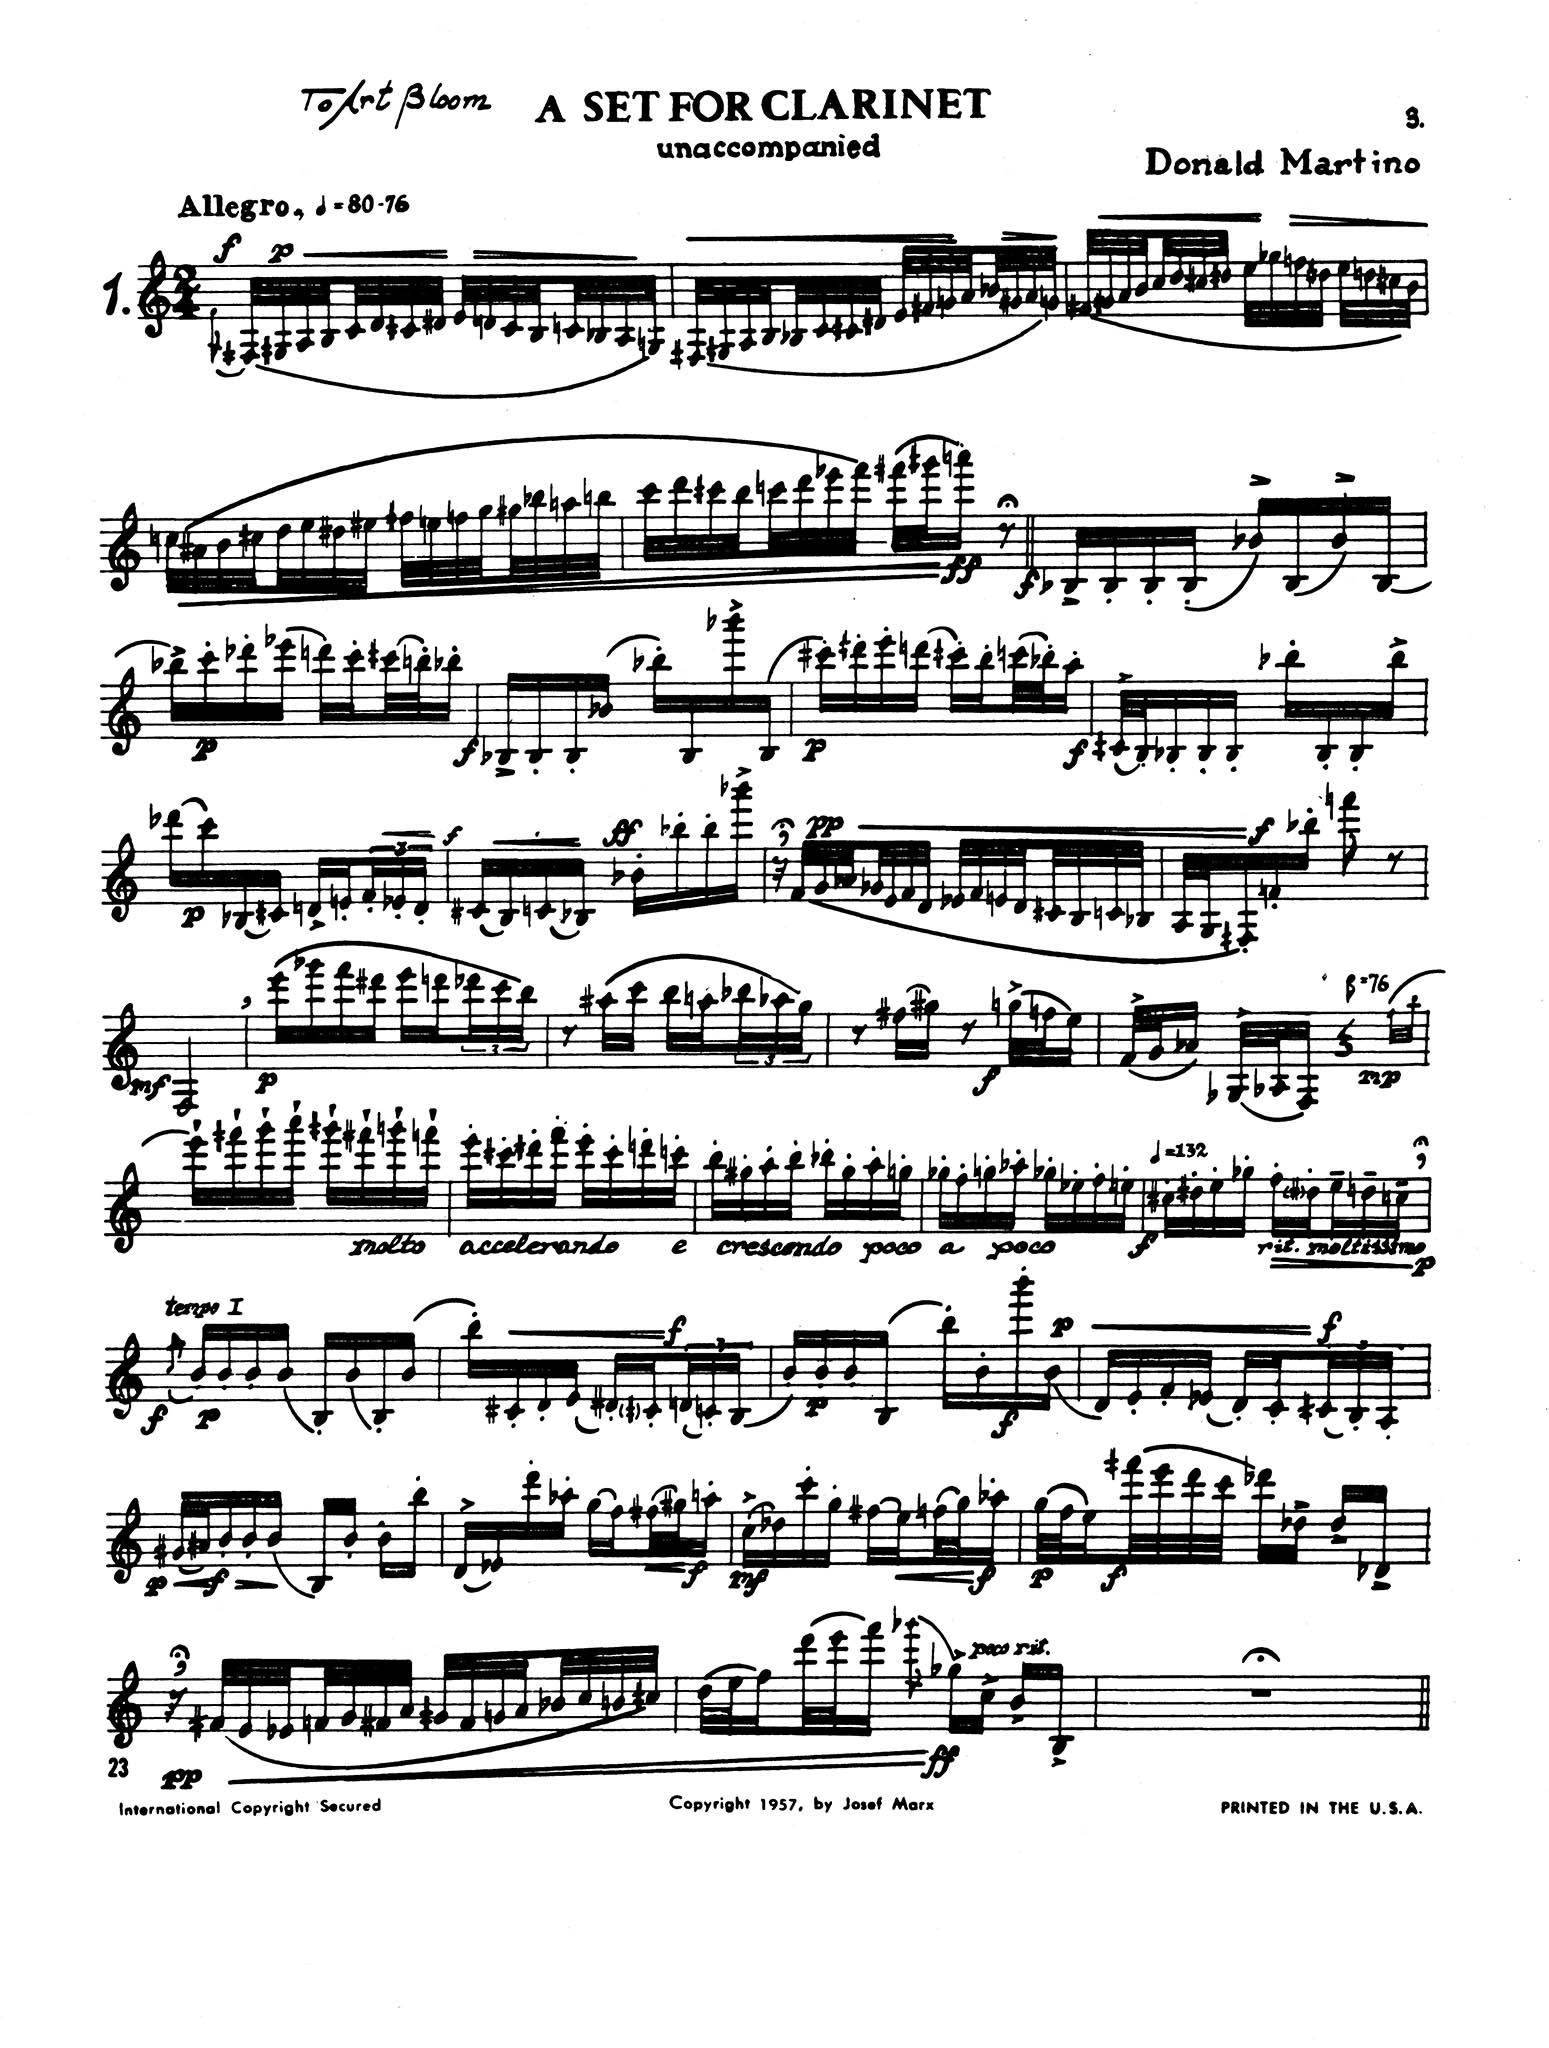 A Set for Clarinet - Movement 1